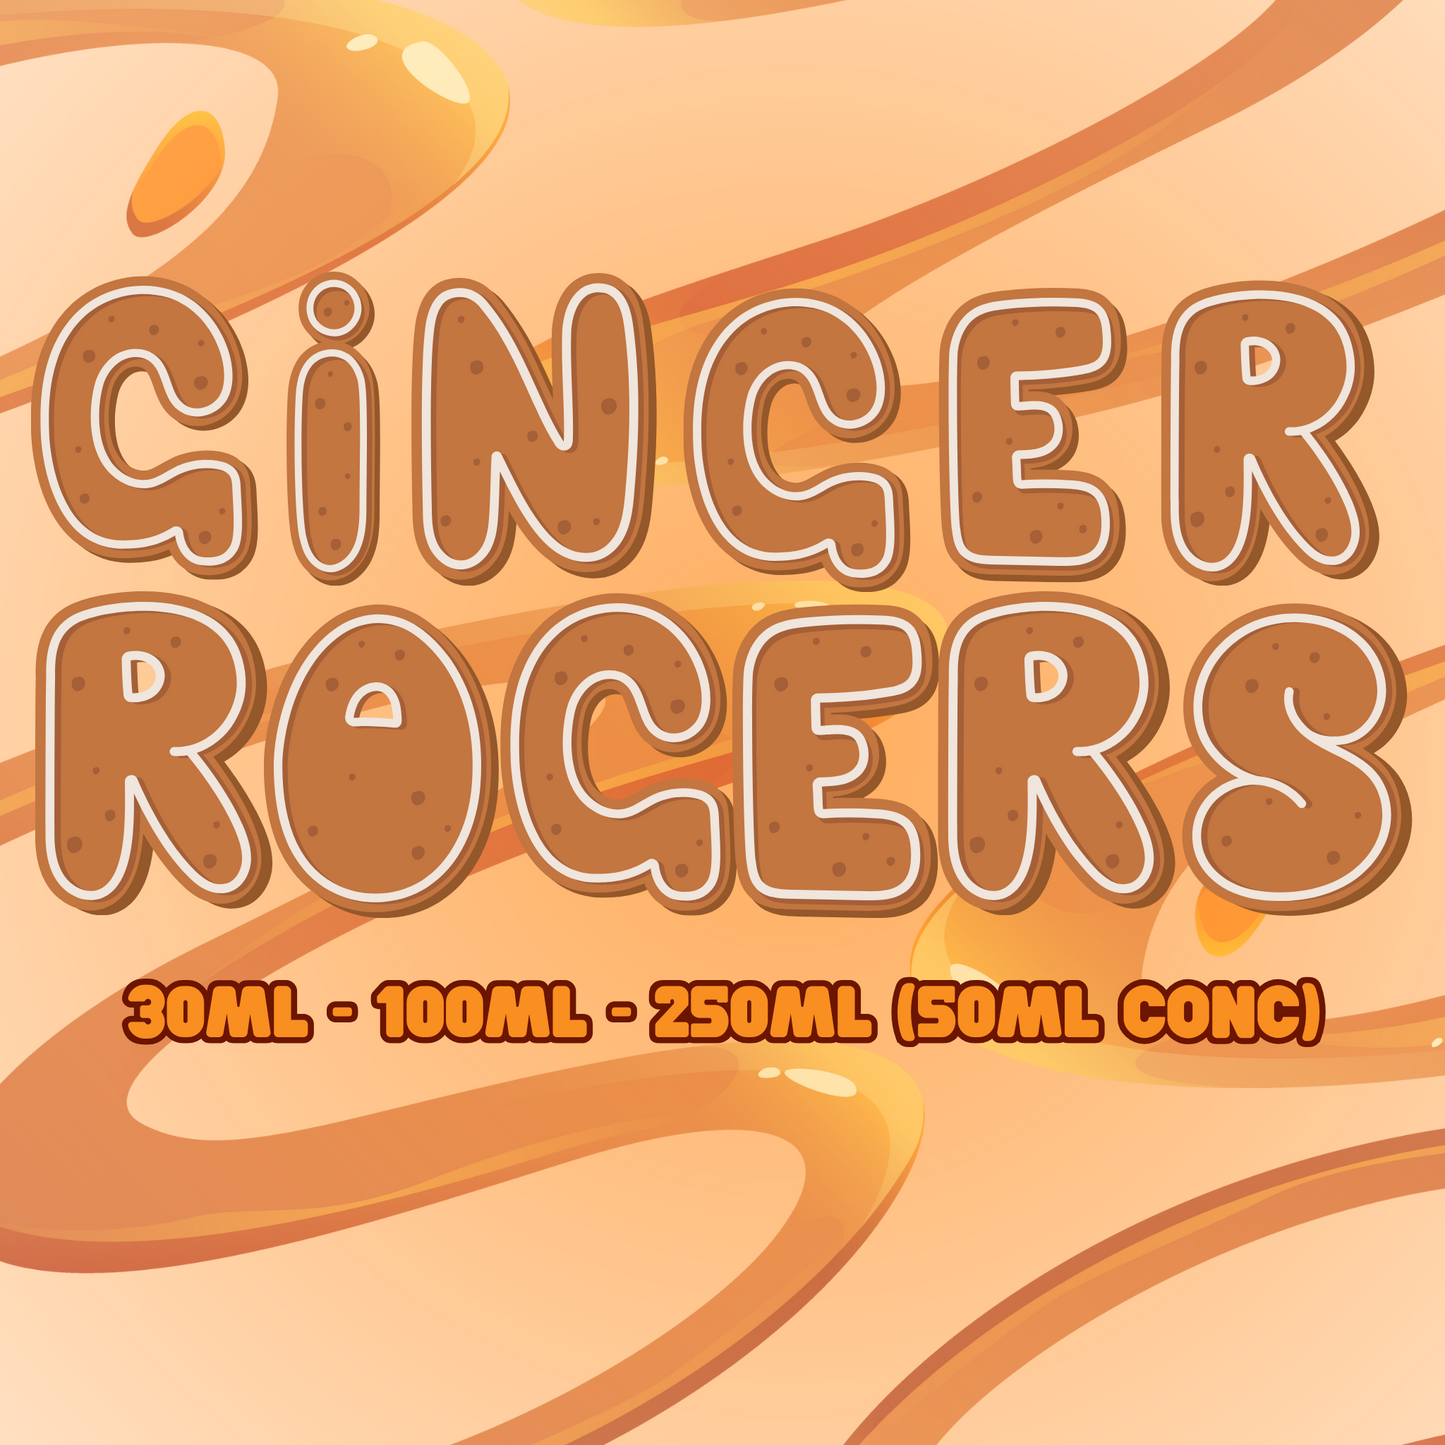 Ginger Rogers - Flavour Craver